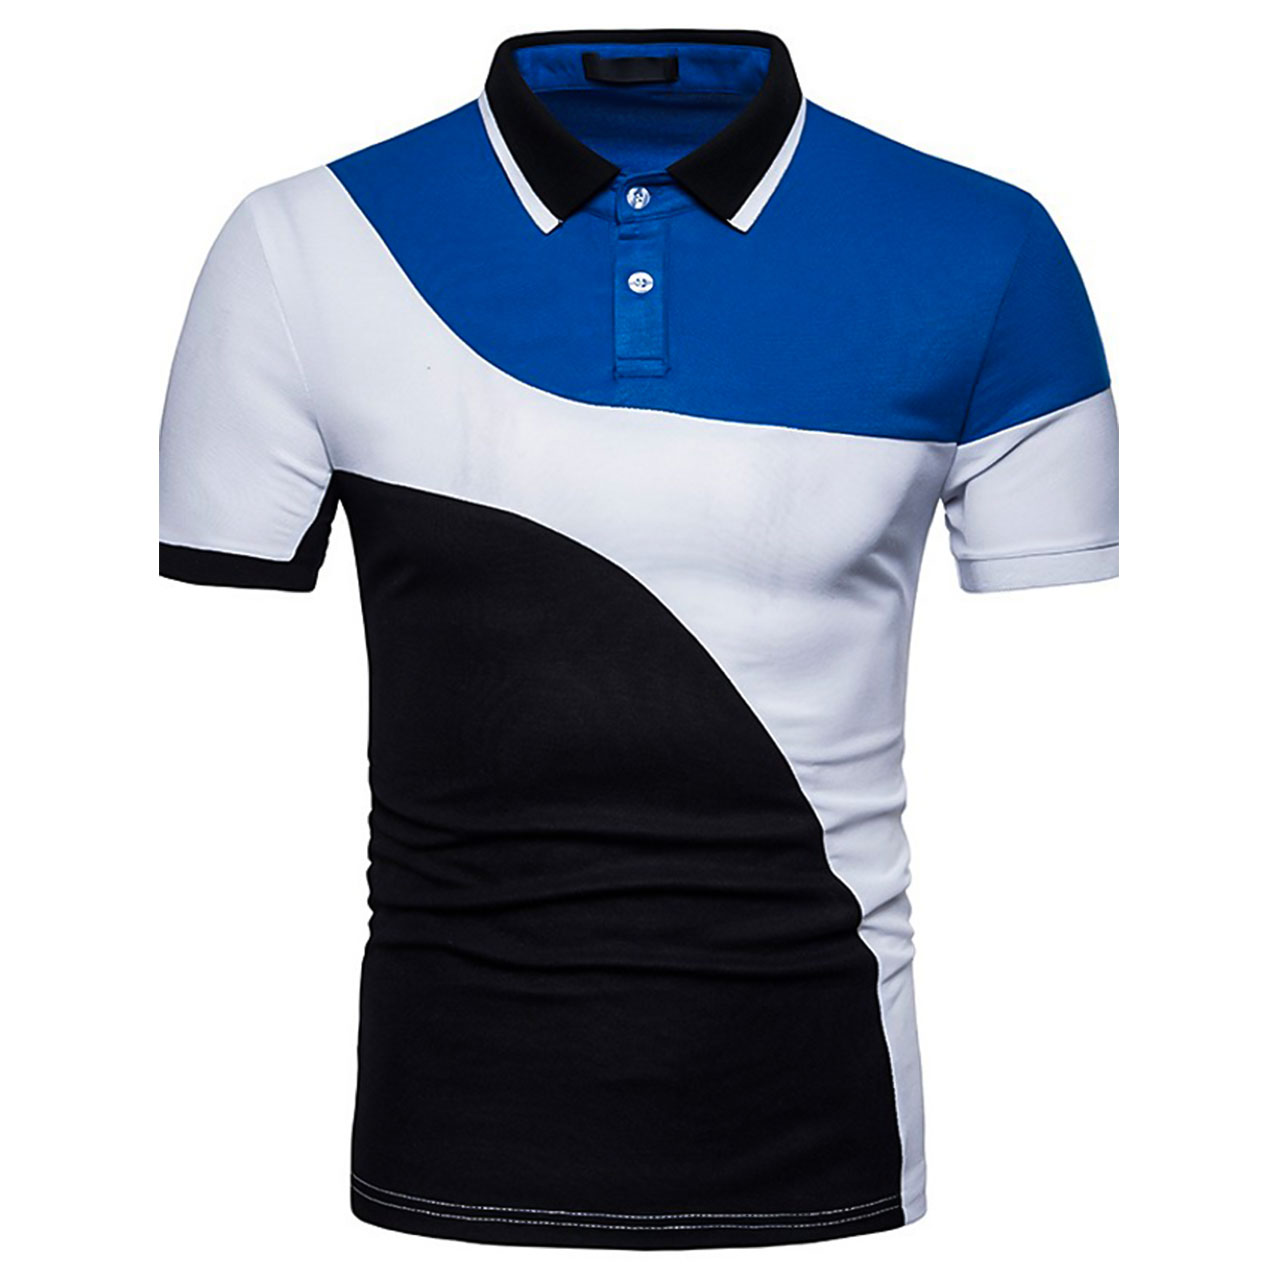 Men's Patchwork Chinoiserie Cotton Collared Half Sleeve Blue White And  Black Polo Shirts, $35.99,